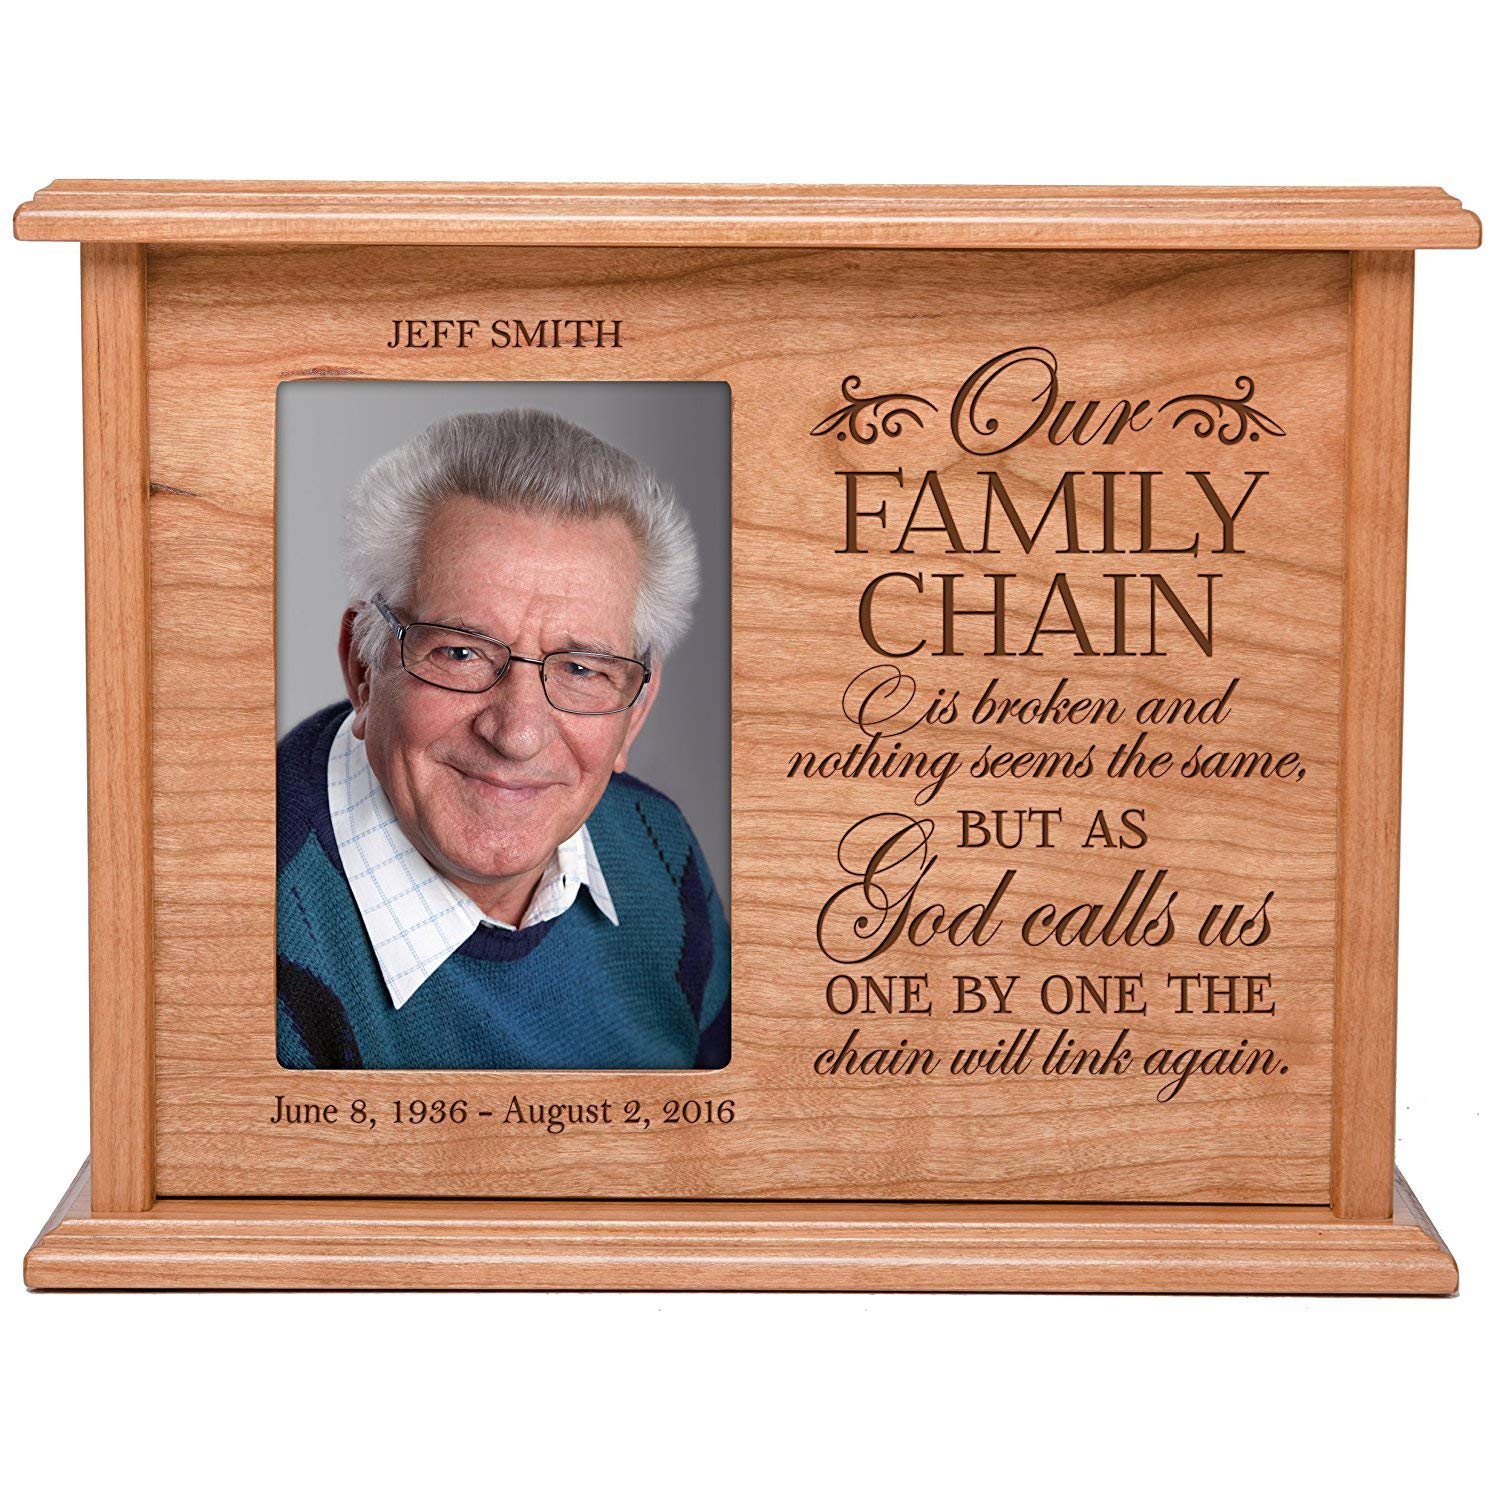 Custom Engraved Cherry Wood Urn Box with 4x6 Photo holds 200 cu in of Human Ashes Our Family Chain - LifeSong Milestones